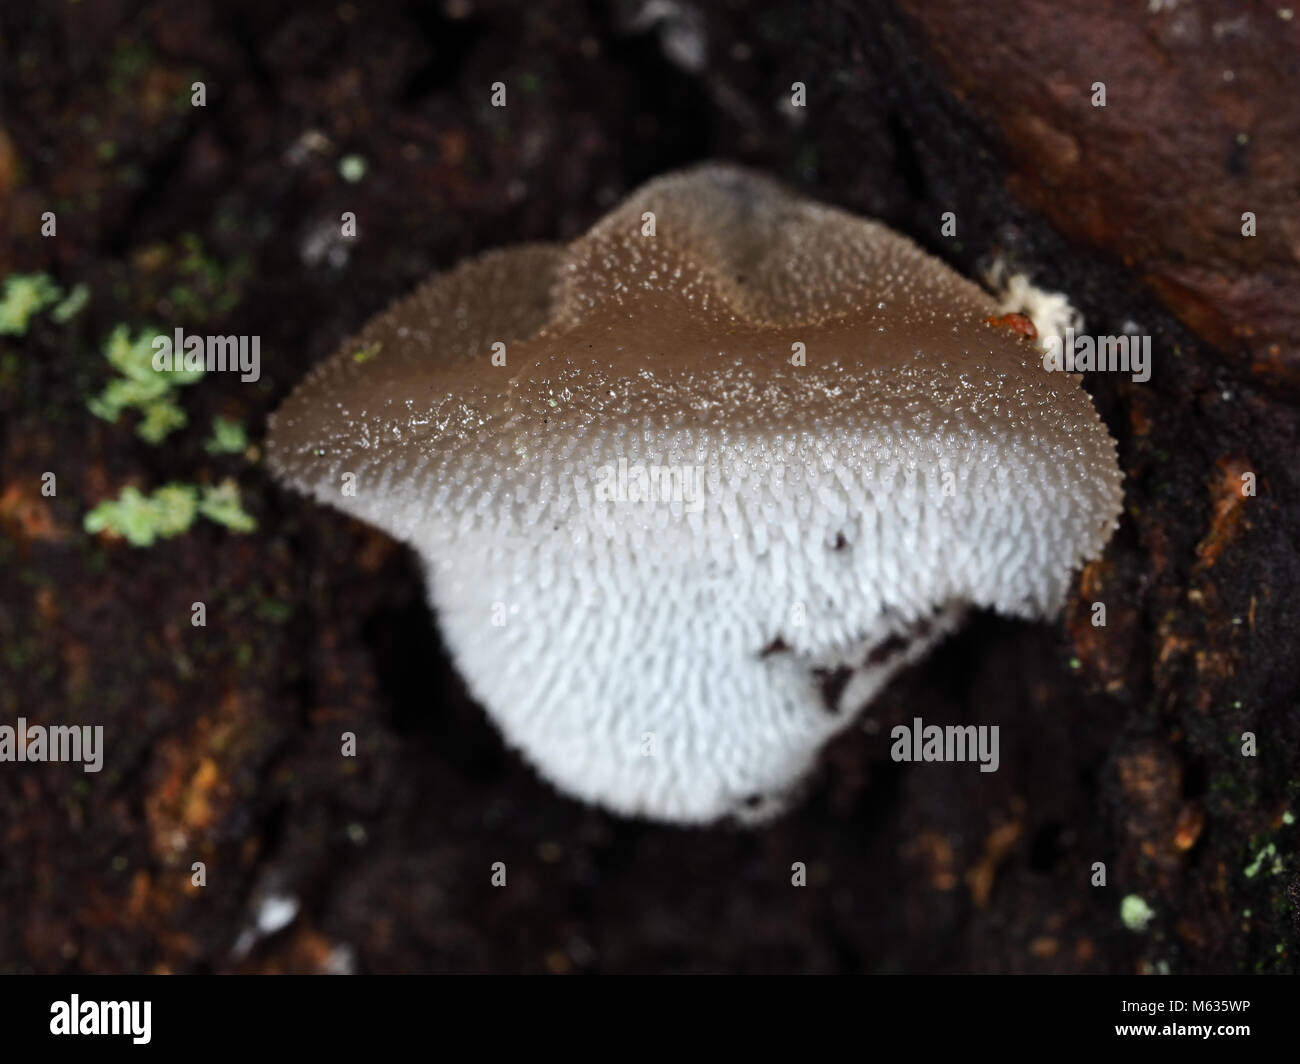 Pseudohydnum gelatinosum (toothed jelly fungus) mushroom growing in a Pacific Northwest forest, close-up view Stock Photo